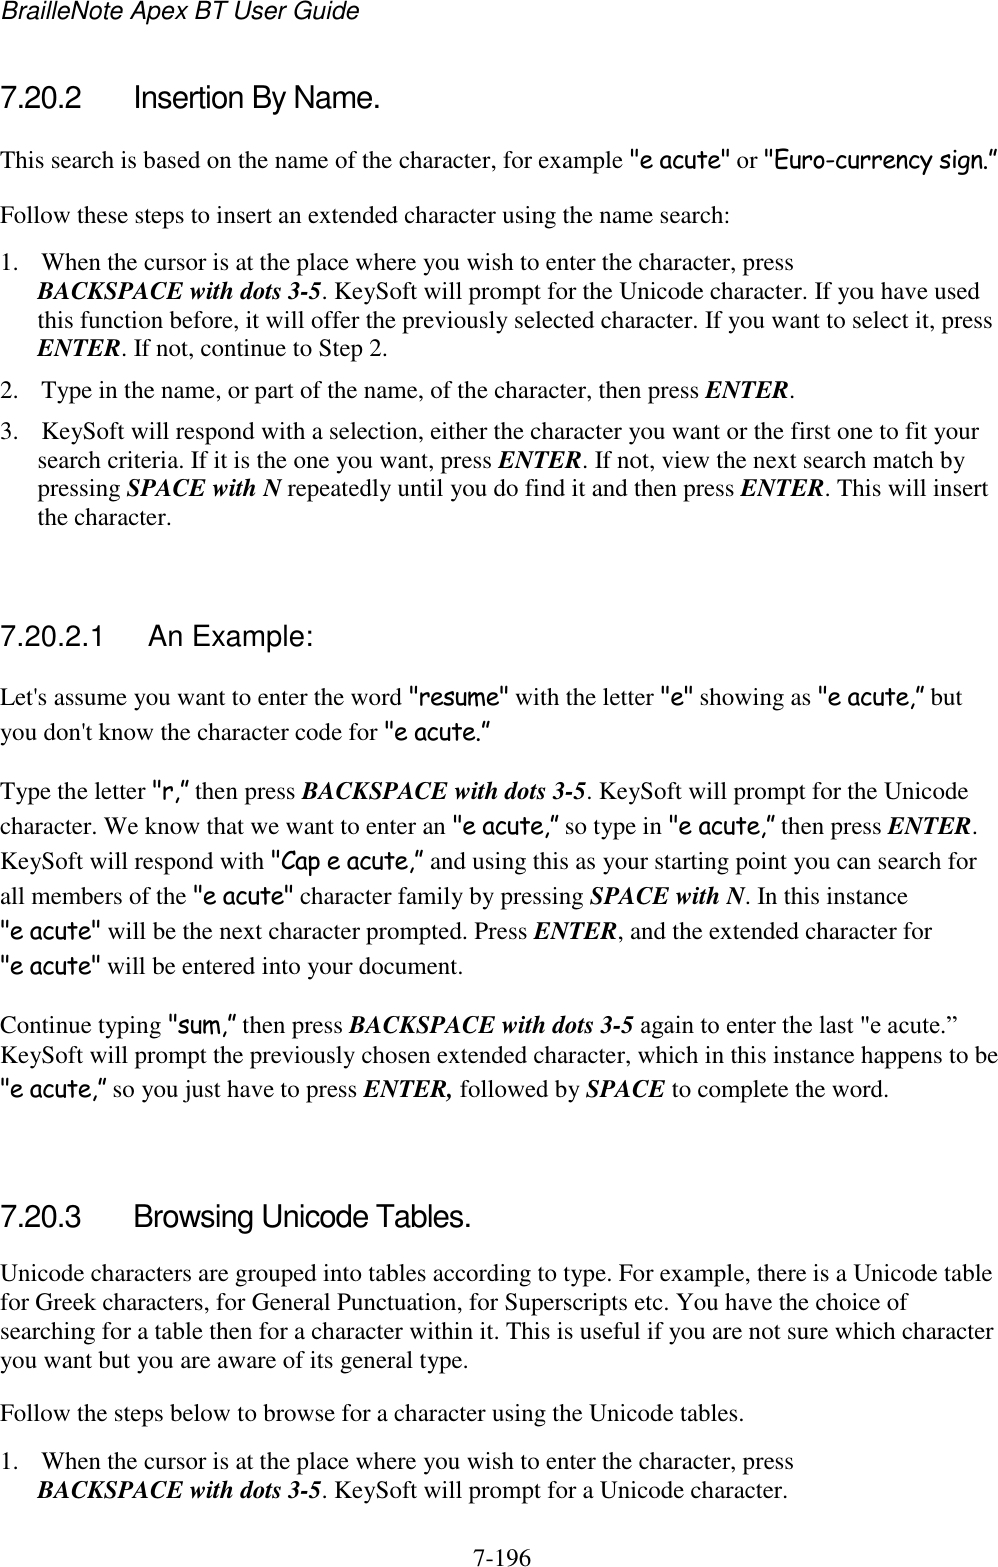 BrailleNote Apex BT User Guide   7-196   7.20.2  Insertion By Name. This search is based on the name of the character, for example &quot;e acute&quot; or &quot;Euro-currency sign.” Follow these steps to insert an extended character using the name search: 1. When the cursor is at the place where you wish to enter the character, press BACKSPACE with dots 3-5. KeySoft will prompt for the Unicode character. If you have used this function before, it will offer the previously selected character. If you want to select it, press ENTER. If not, continue to Step 2. 2. Type in the name, or part of the name, of the character, then press ENTER. 3. KeySoft will respond with a selection, either the character you want or the first one to fit your search criteria. If it is the one you want, press ENTER. If not, view the next search match by pressing SPACE with N repeatedly until you do find it and then press ENTER. This will insert the character.   7.20.2.1  An Example: Let&apos;s assume you want to enter the word &quot;resume&quot; with the letter &quot;e&quot; showing as &quot;e acute,” but you don&apos;t know the character code for &quot;e acute.” Type the letter &quot;r,” then press BACKSPACE with dots 3-5. KeySoft will prompt for the Unicode character. We know that we want to enter an &quot;e acute,” so type in &quot;e acute,” then press ENTER. KeySoft will respond with &quot;Cap e acute,” and using this as your starting point you can search for all members of the &quot;e acute&quot; character family by pressing SPACE with N. In this instance &quot;e acute&quot; will be the next character prompted. Press ENTER, and the extended character for &quot;e acute&quot; will be entered into your document. Continue typing &quot;sum,” then press BACKSPACE with dots 3-5 again to enter the last &quot;e acute.” KeySoft will prompt the previously chosen extended character, which in this instance happens to be &quot;e acute,” so you just have to press ENTER, followed by SPACE to complete the word.   7.20.3  Browsing Unicode Tables. Unicode characters are grouped into tables according to type. For example, there is a Unicode table for Greek characters, for General Punctuation, for Superscripts etc. You have the choice of searching for a table then for a character within it. This is useful if you are not sure which character you want but you are aware of its general type. Follow the steps below to browse for a character using the Unicode tables. 1. When the cursor is at the place where you wish to enter the character, press BACKSPACE with dots 3-5. KeySoft will prompt for a Unicode character. 